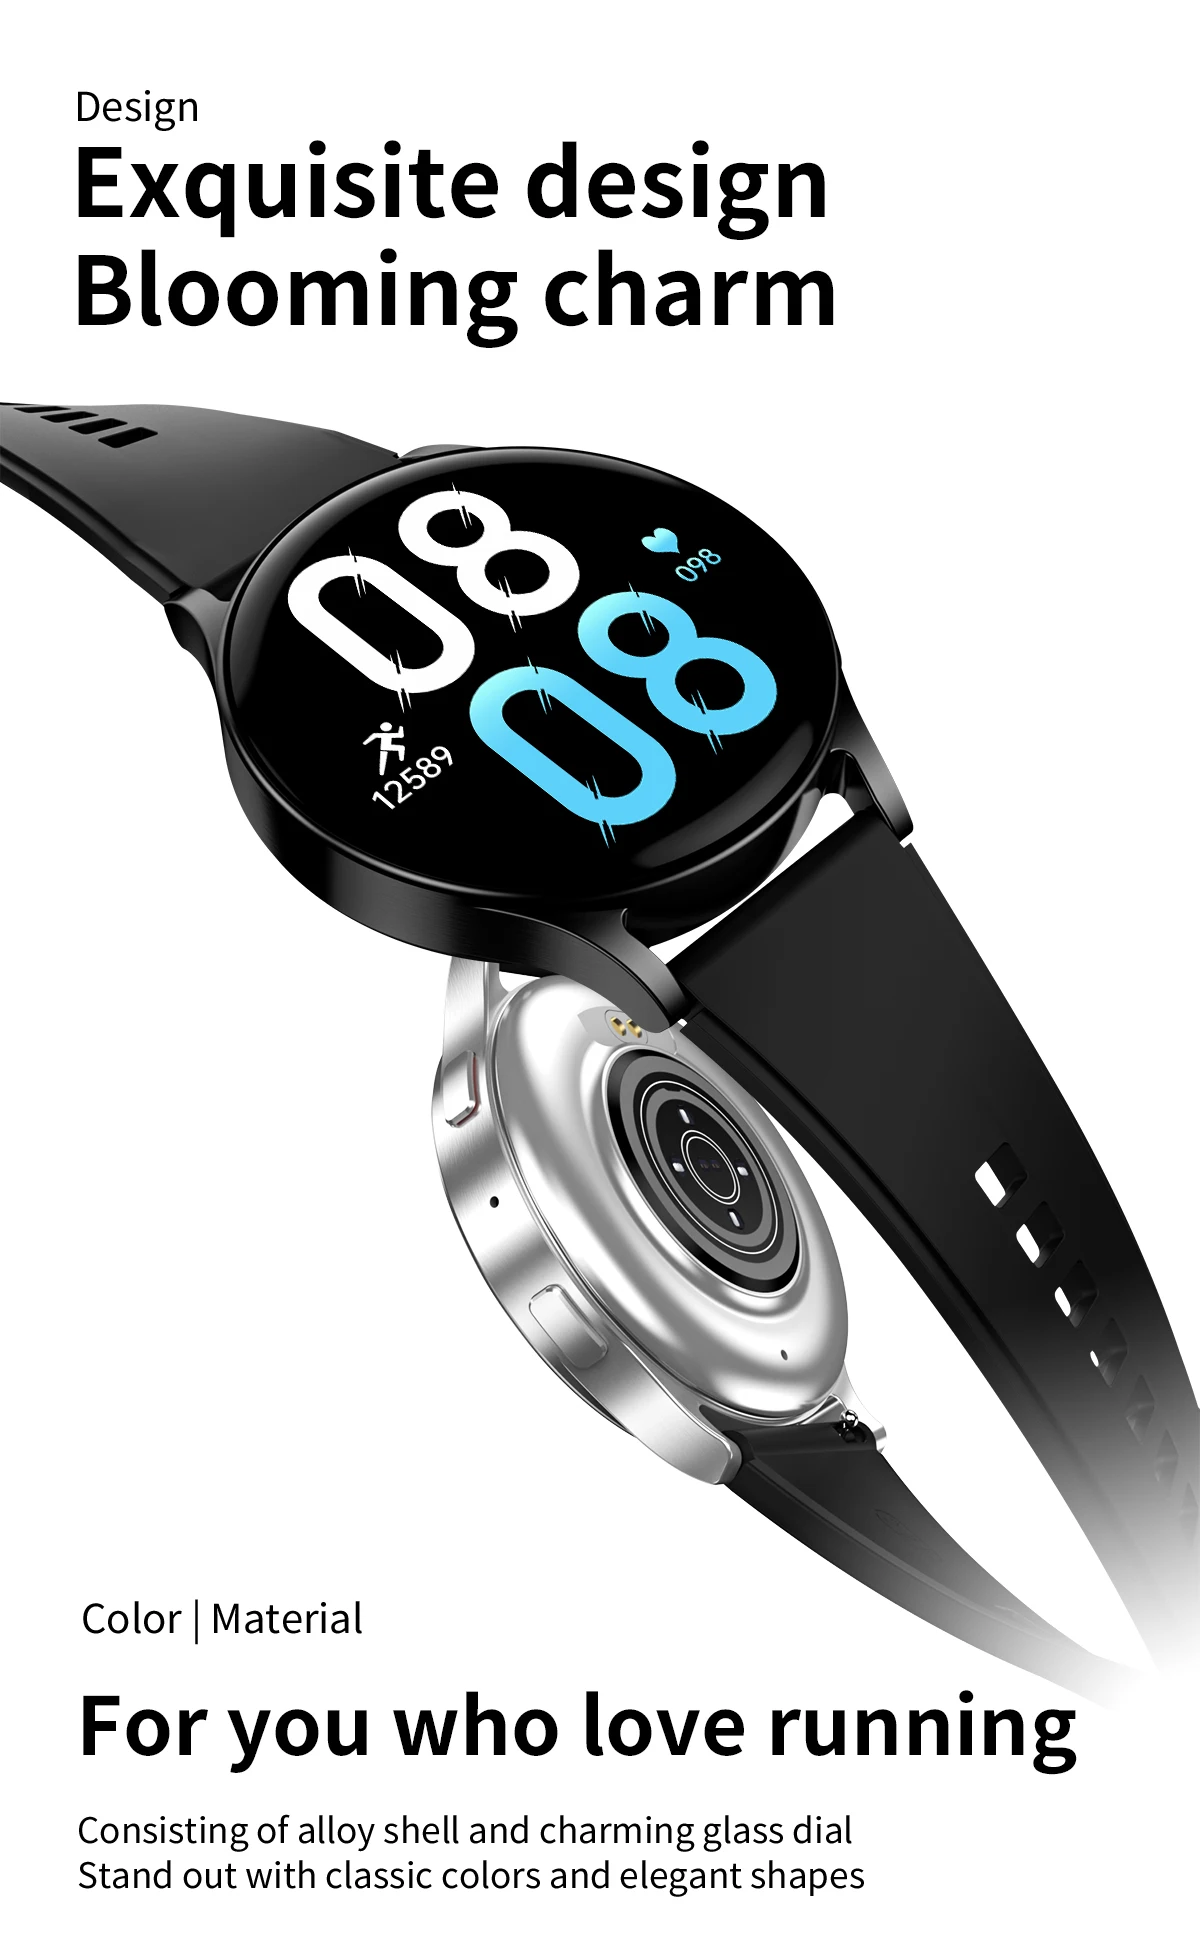 Ultimate Sports and Fitness Smart Watch with Bluetooth Calling and Heart Rate Monitoring